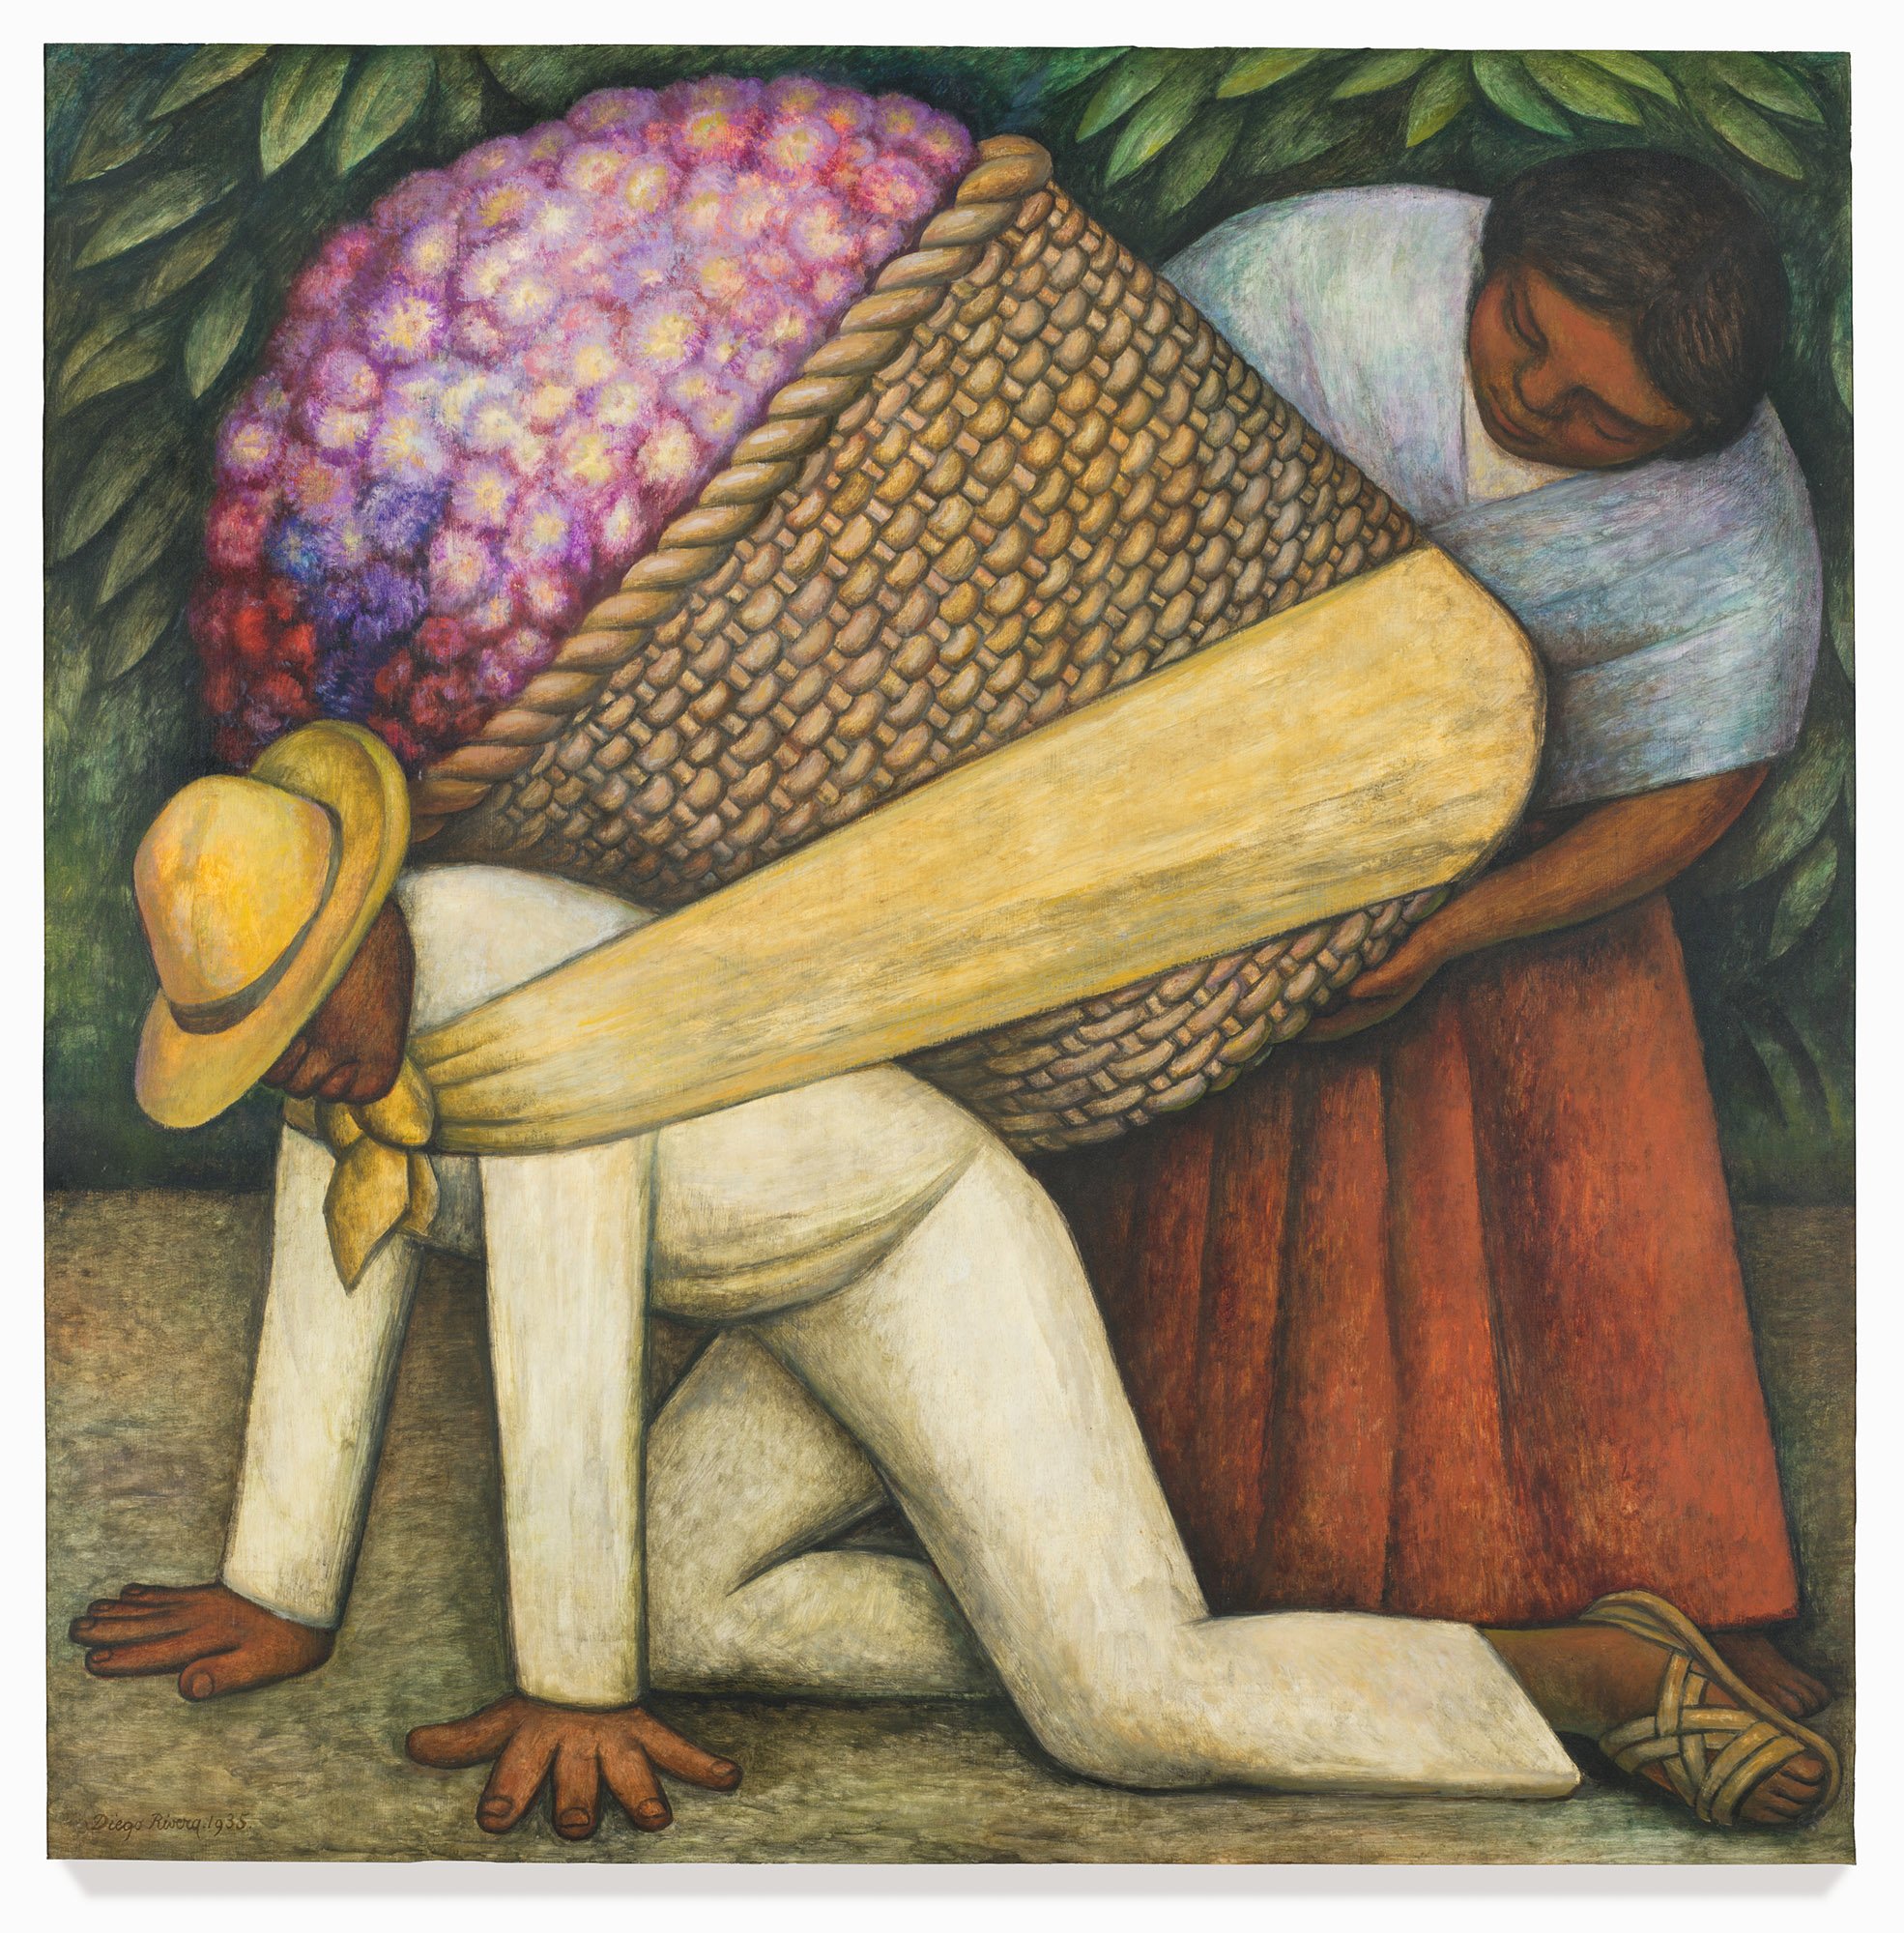 Diego Rivera, The Flower Carrier, 1935